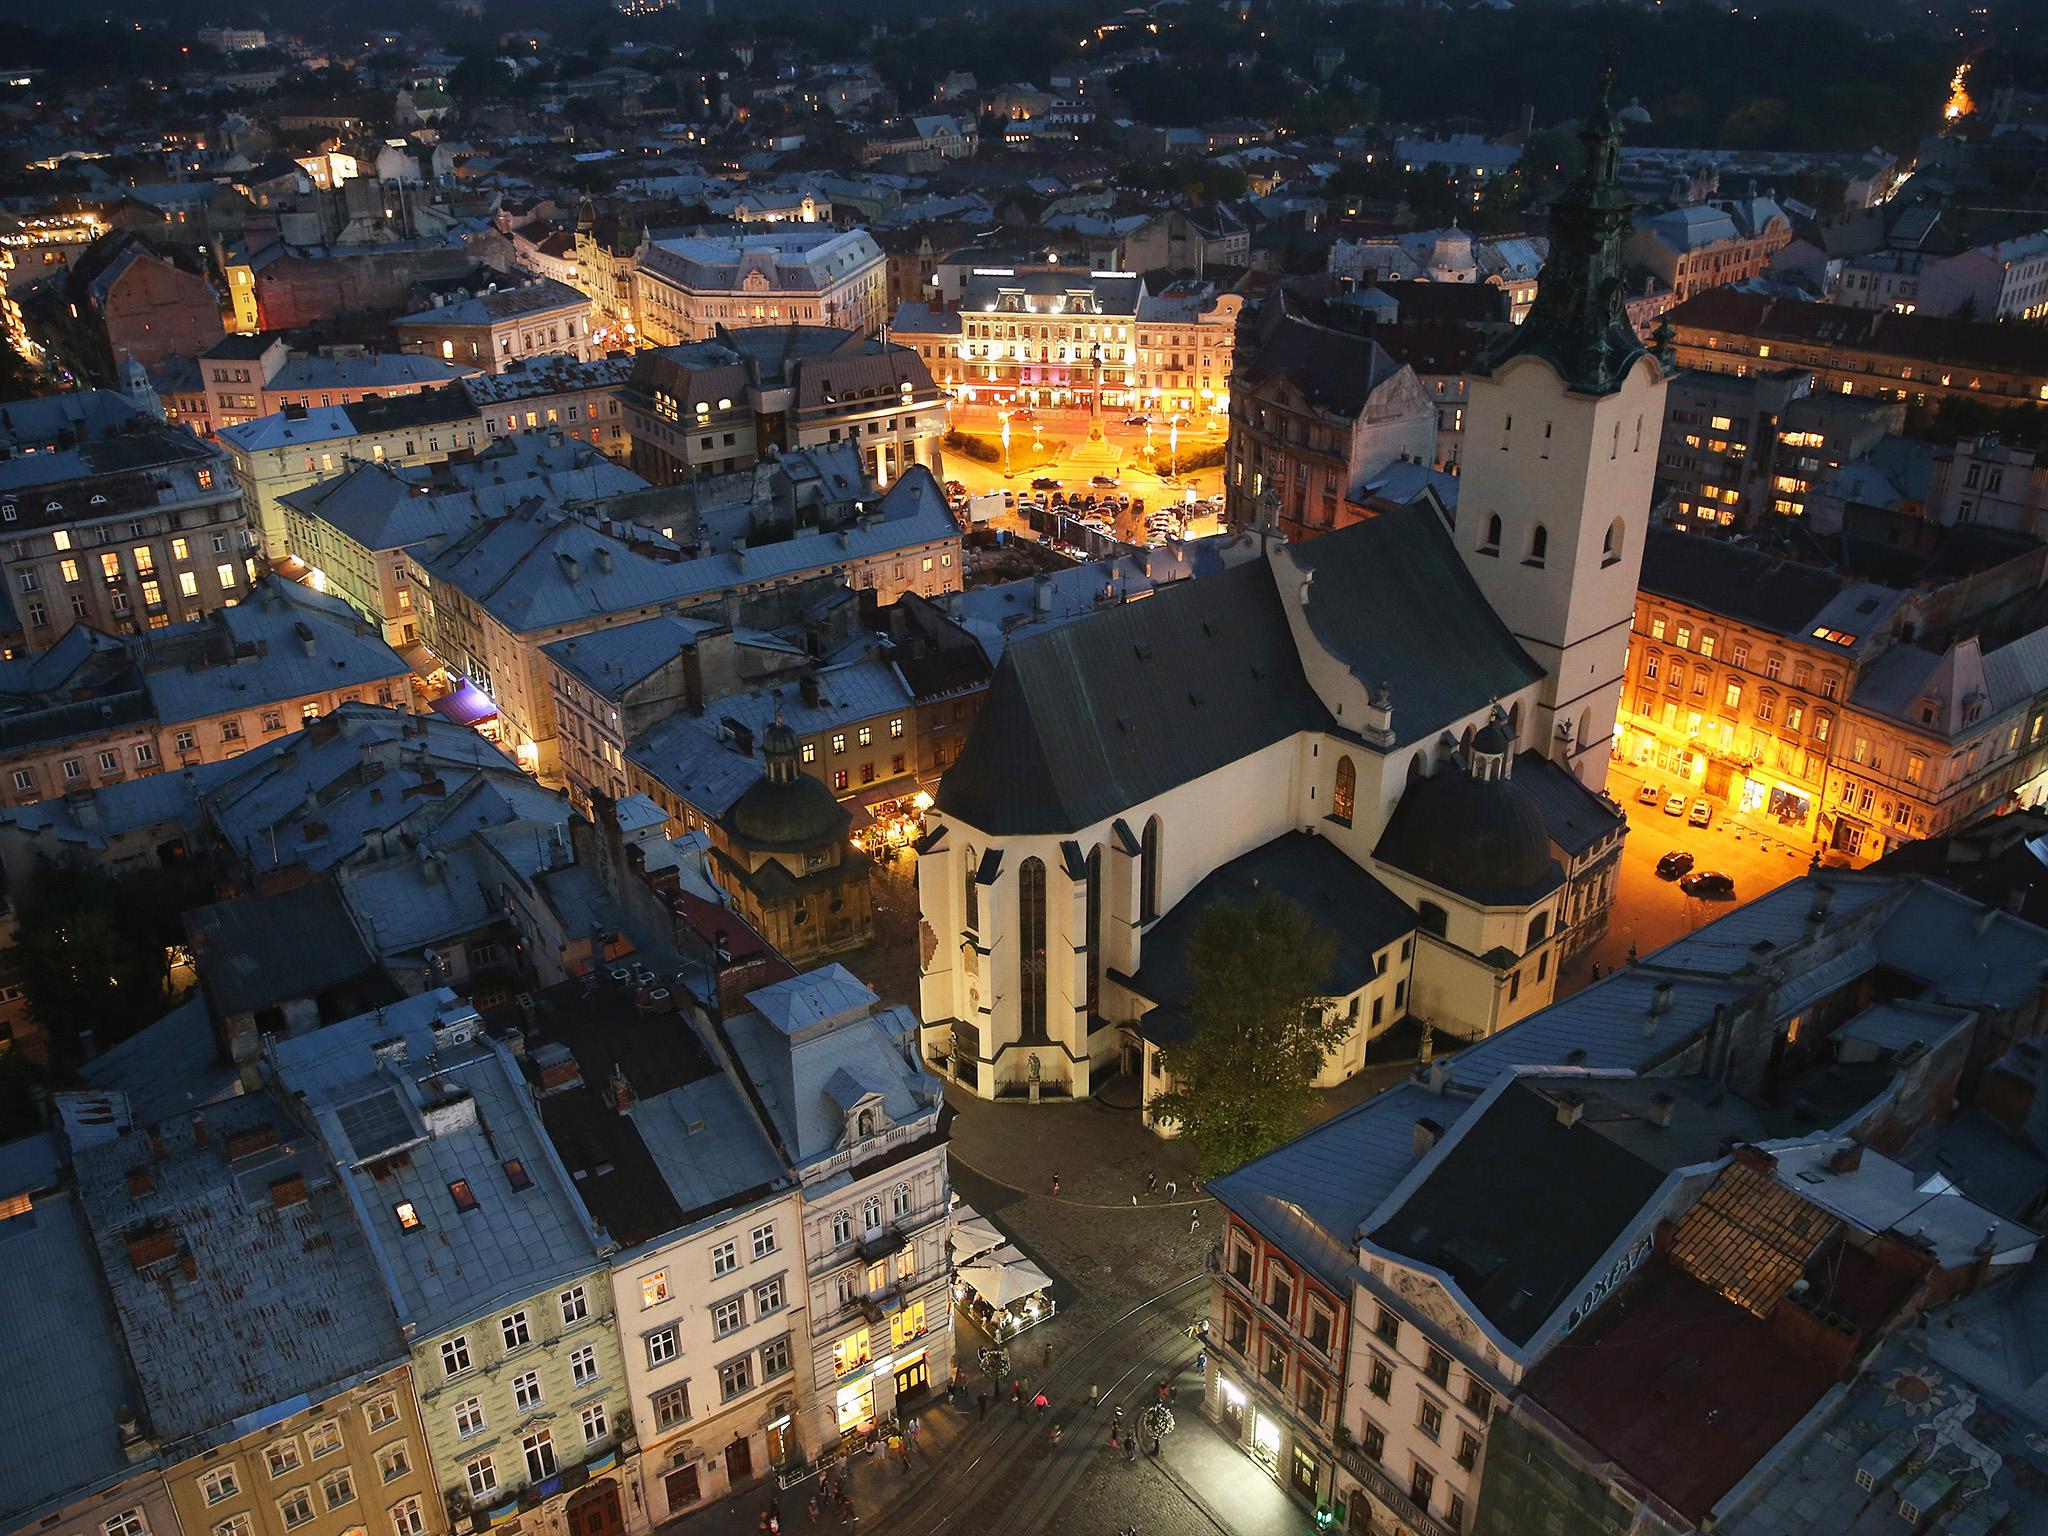 View from the top: the rooftops of the centre of the Old Town